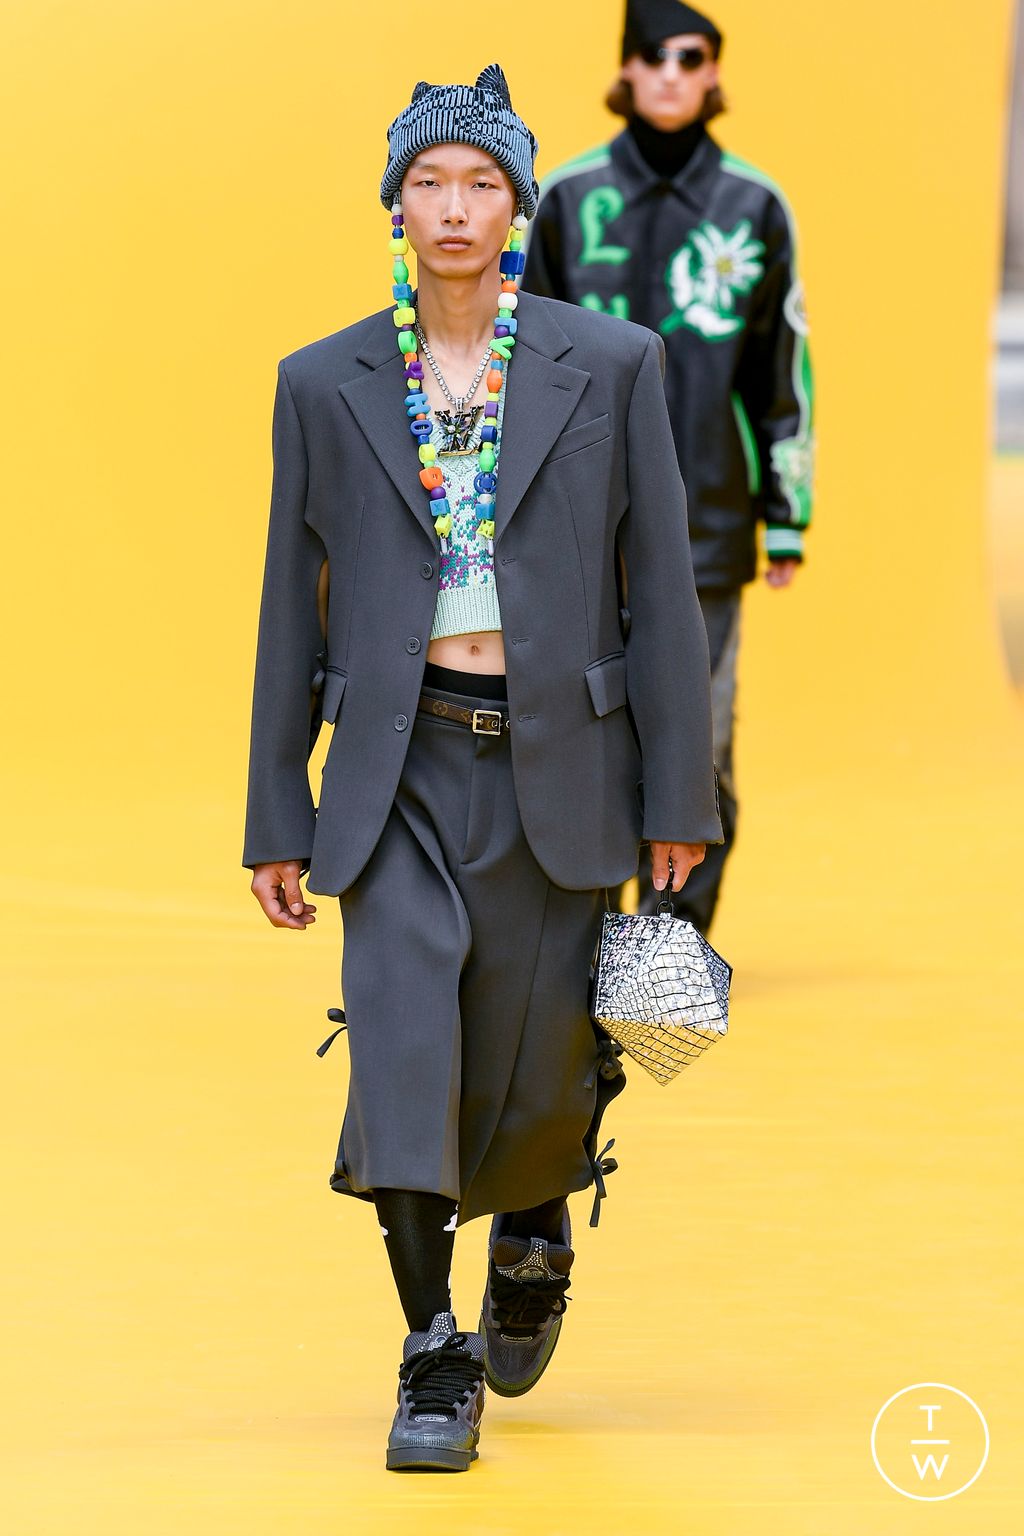 Louis Vuitton pays tribute to Virgil Abloh with Paris Fashion Week show  held at the Louvre  Life